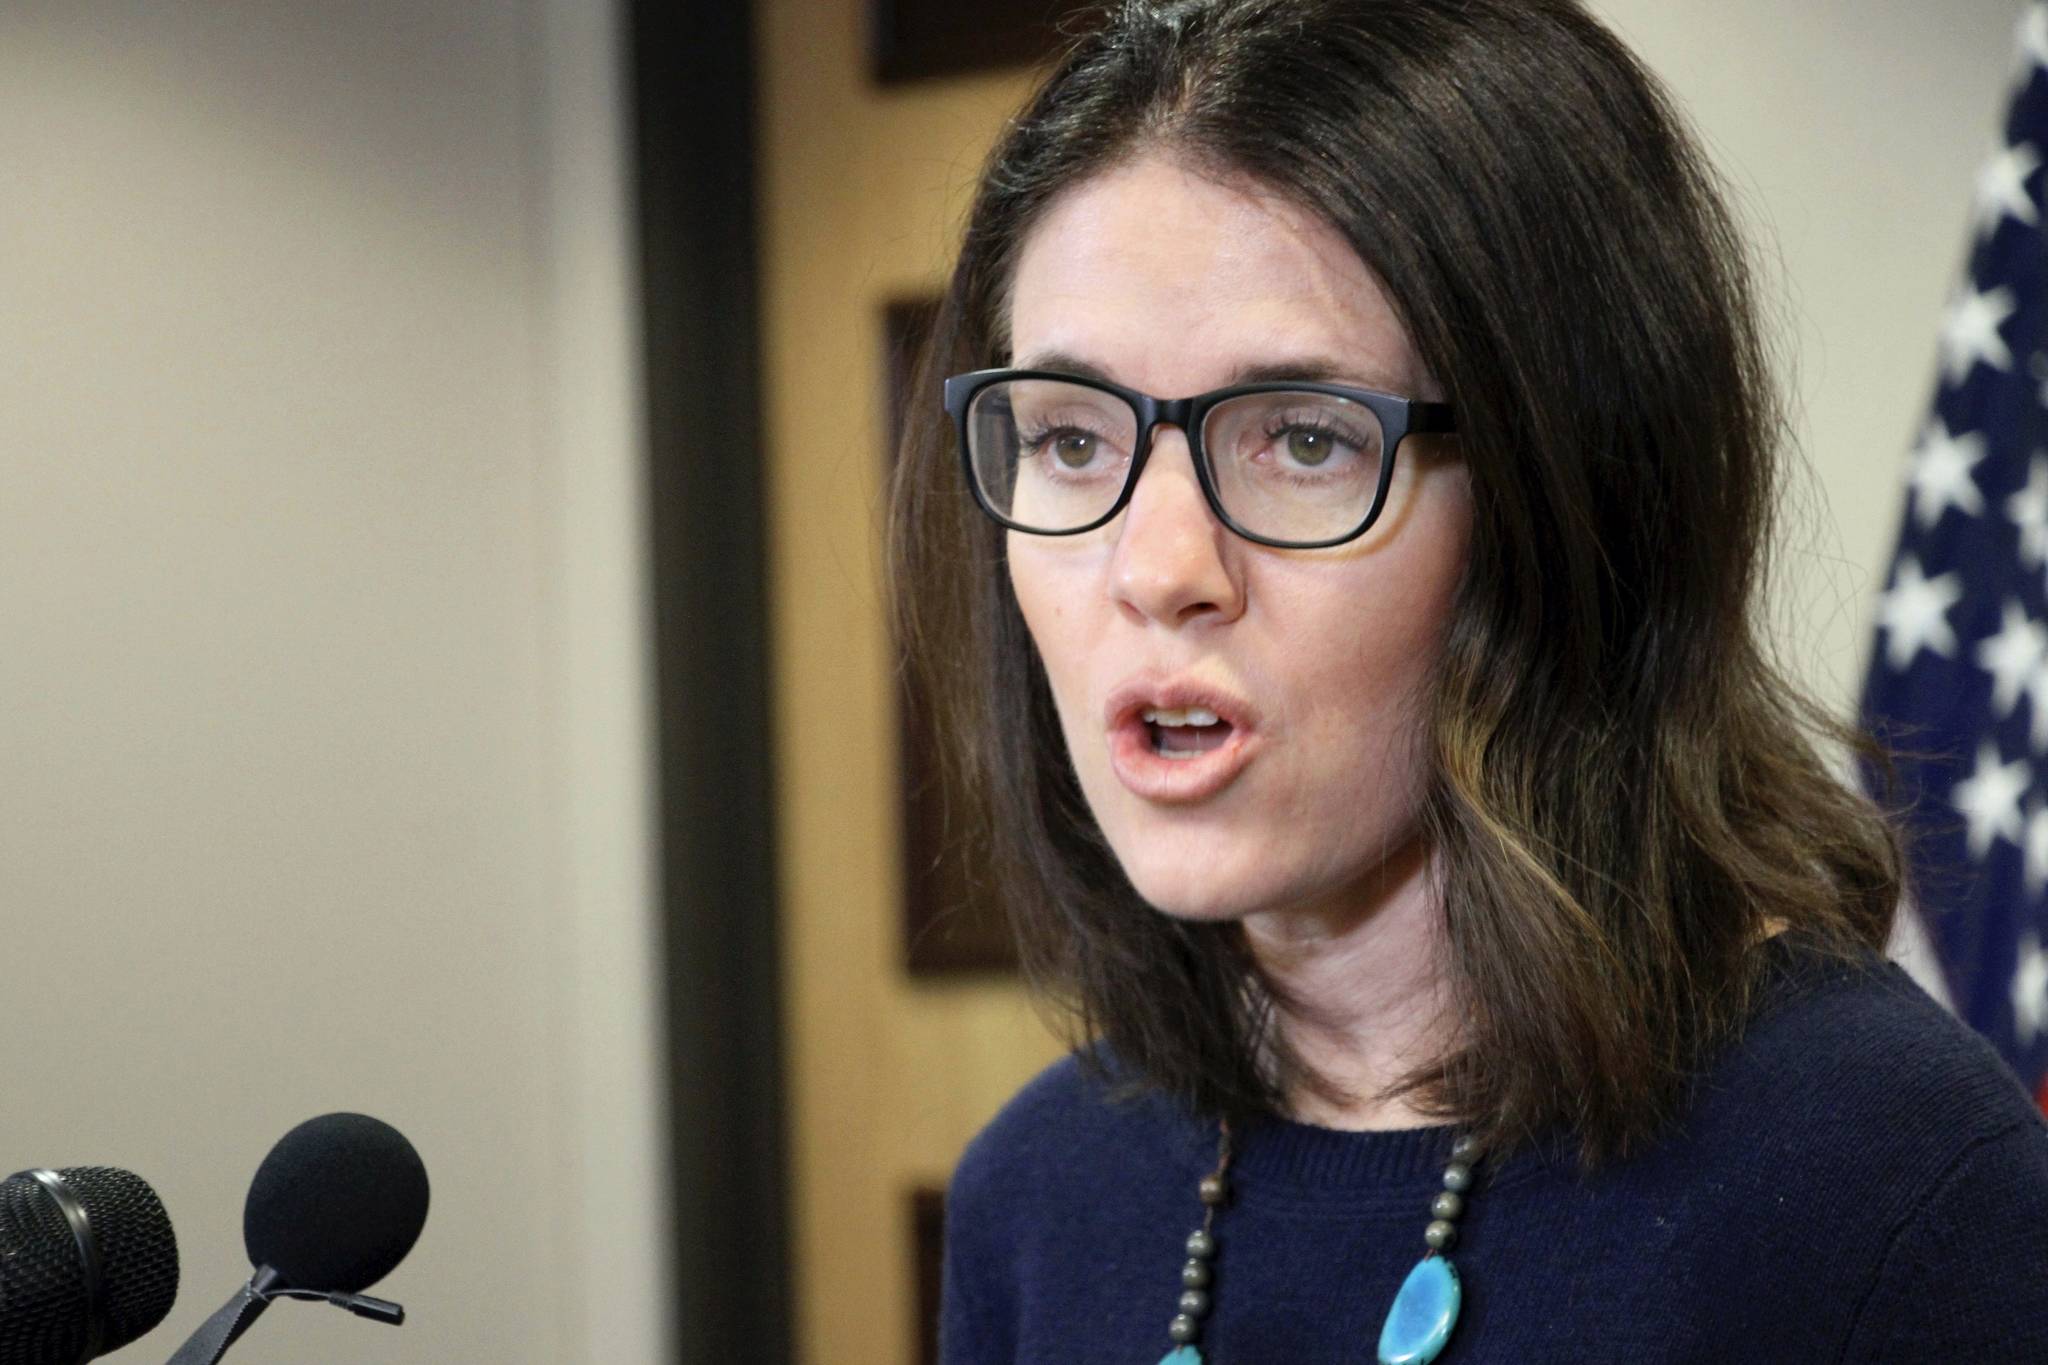 Dr. Anne Zink, the chief medical officer for the state of Alaska, addresses reporters at a news conference Monday, March 9, 2020, in Anchorage, Alaska. Zink told reporters there were nine confirmed COVID-19 cases in the state as of March 18, 2020. (AP Photo/Mark Thiessen)